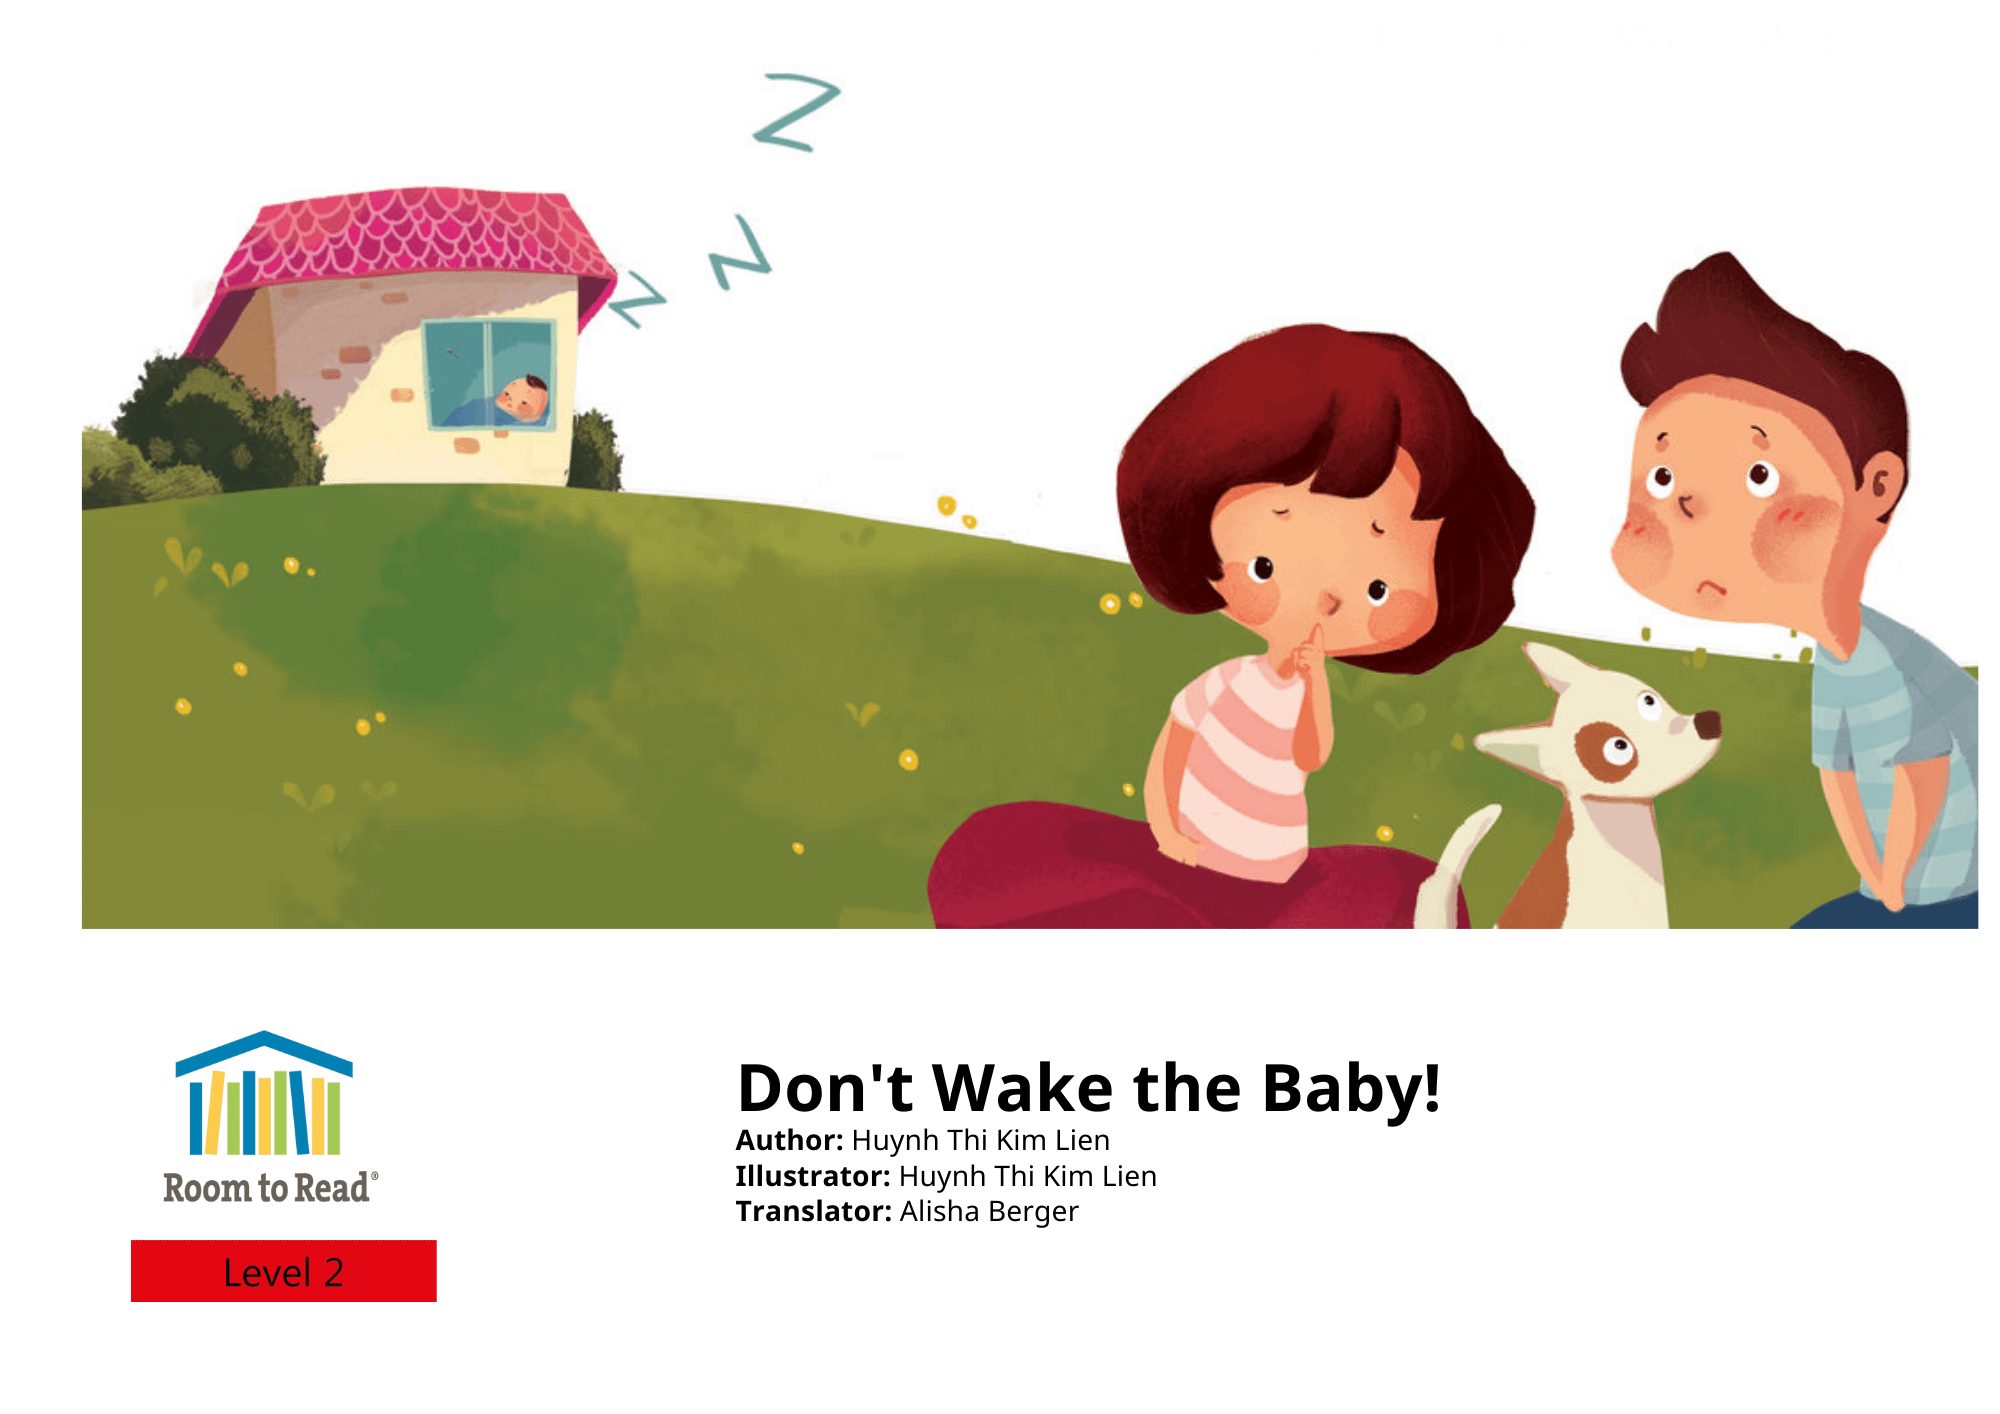 Don’t Wake the Baby